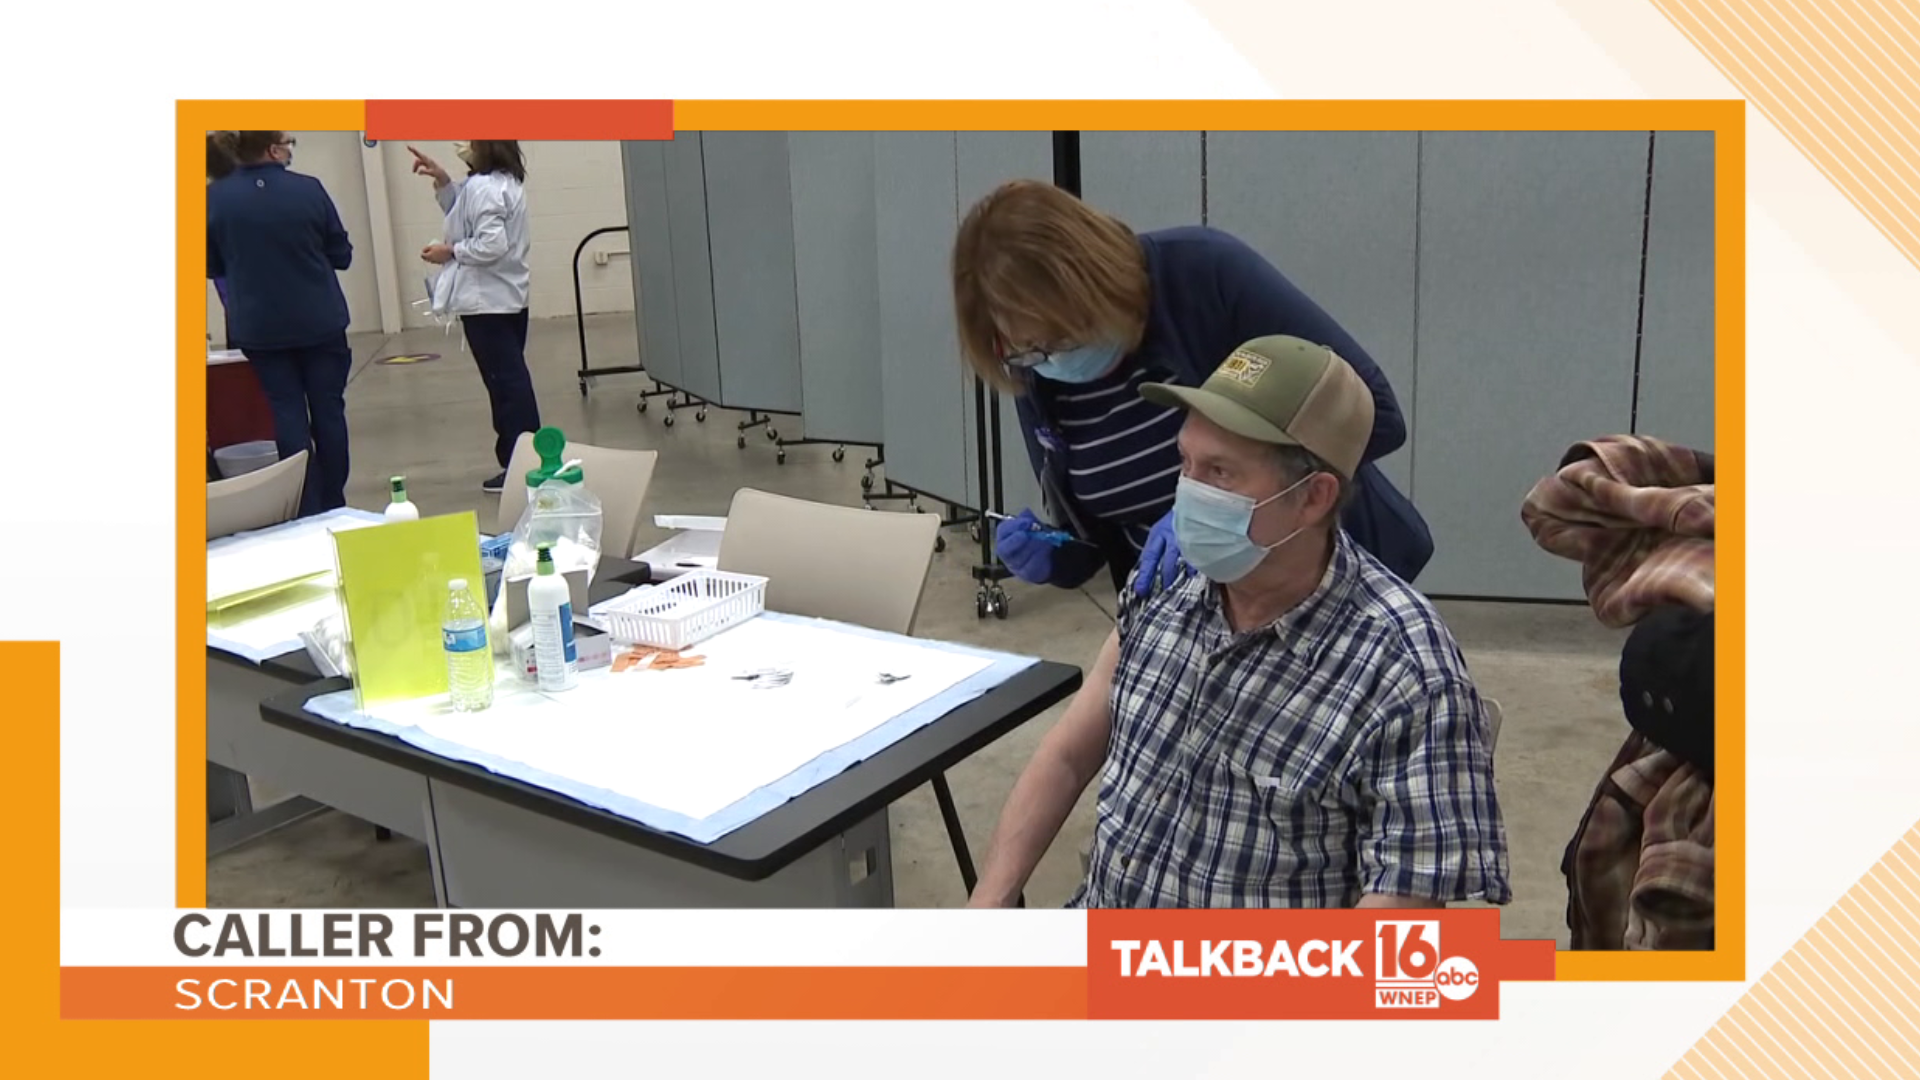 Talkback callers want to talk about, well, vaccines.